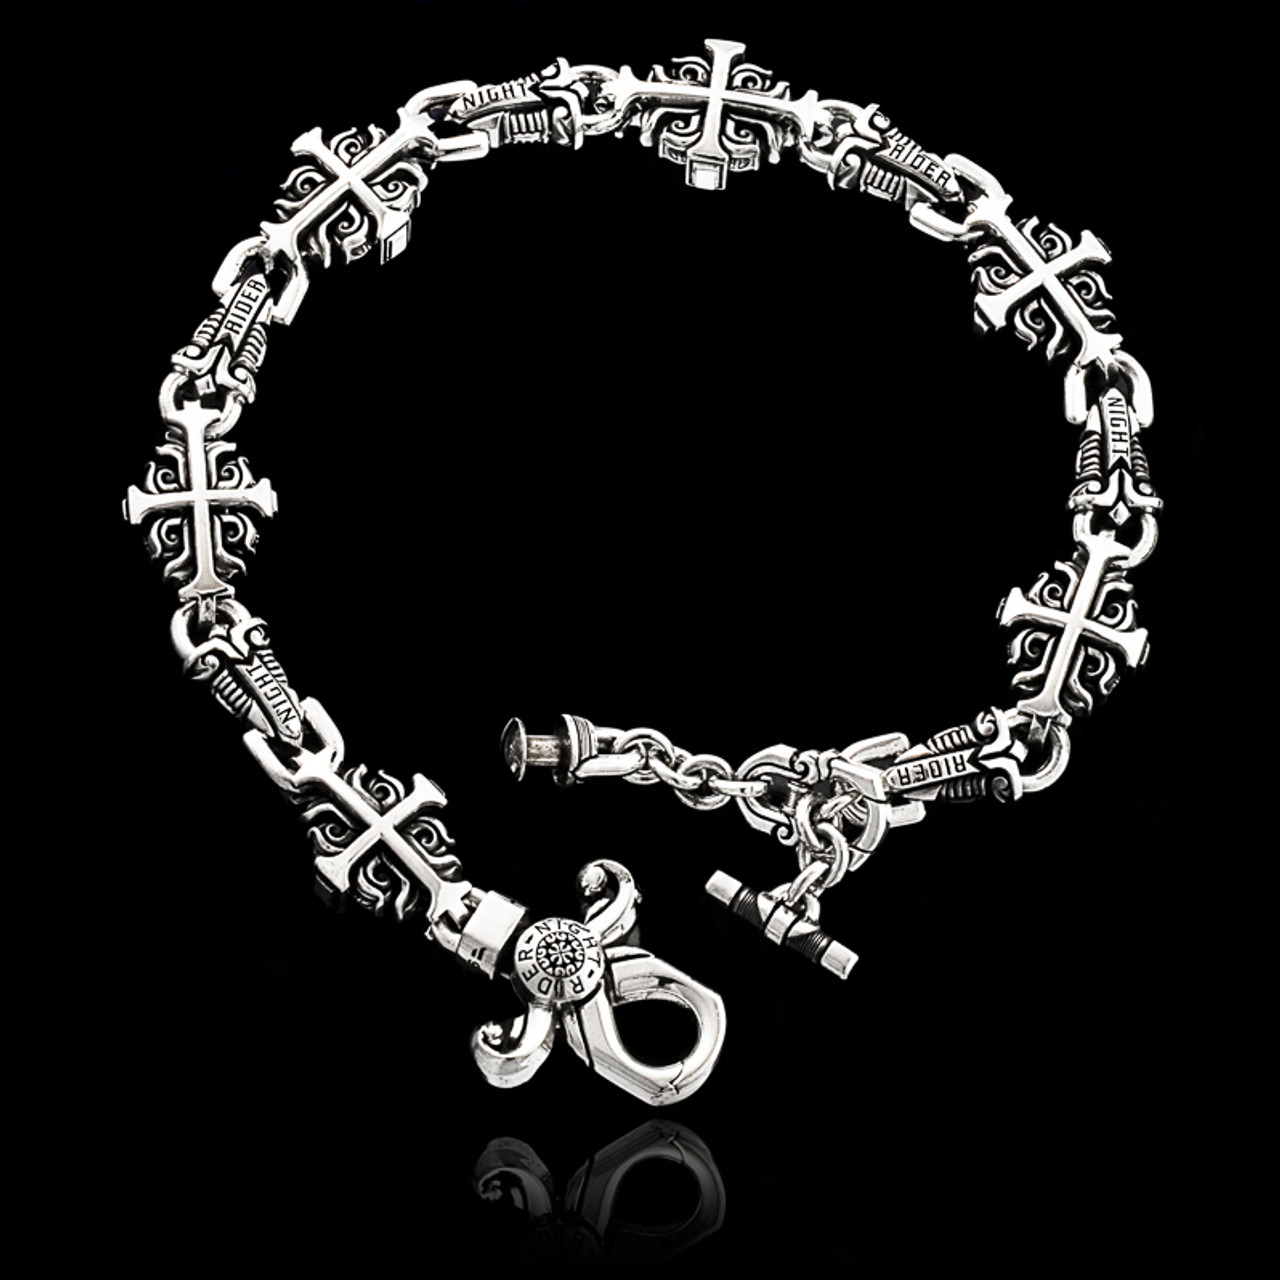 Nightrider Jewelry Death’s Bloom Wallet Chain in Solid 925 Sterling Silver | Large, 21” Length | USA Handcrafted to Order